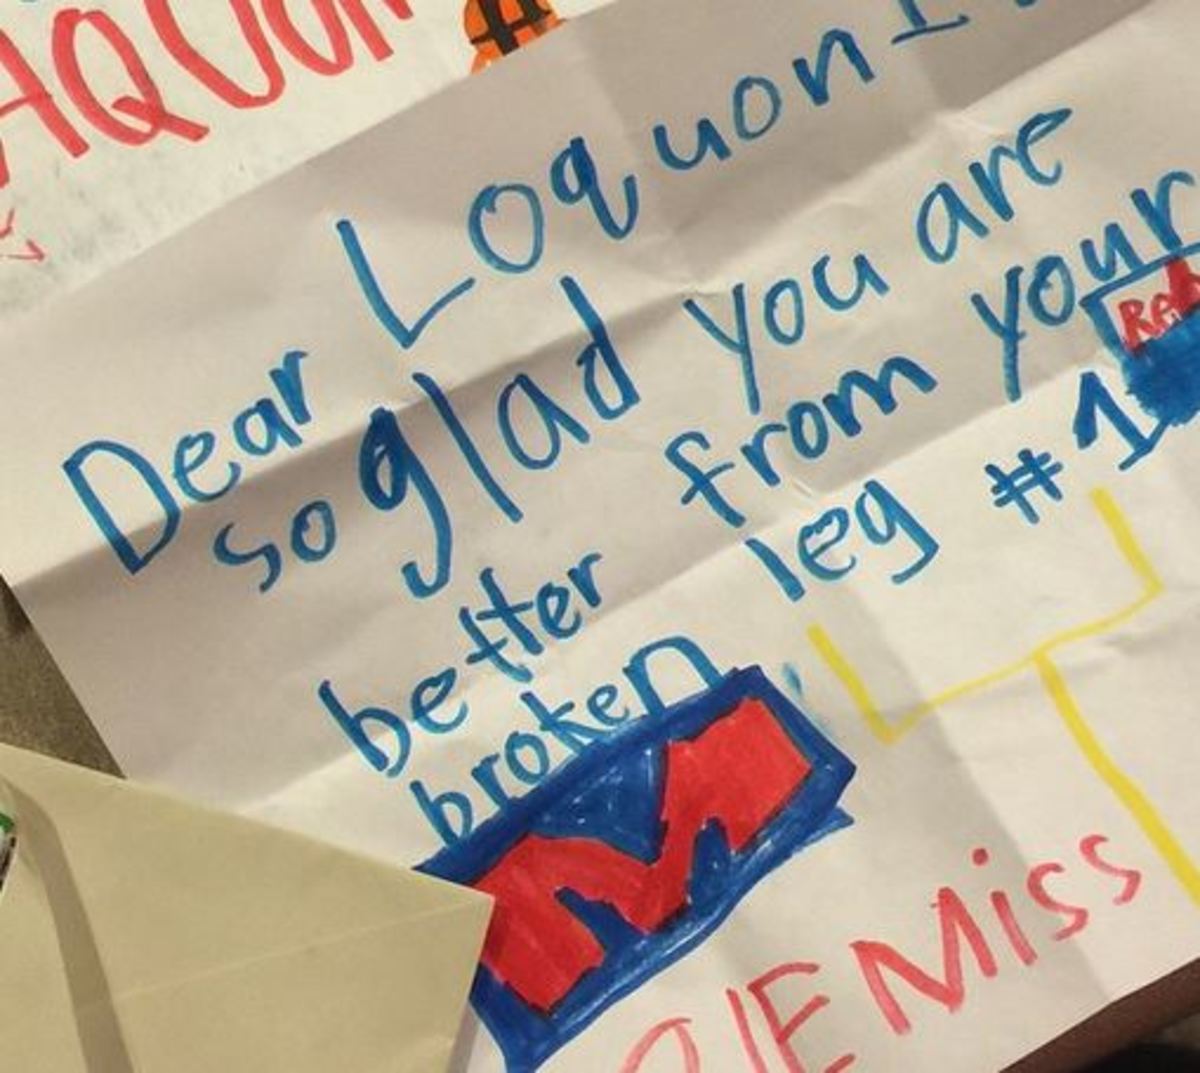 Laquon Treadwell gets letter from fan following his injury.